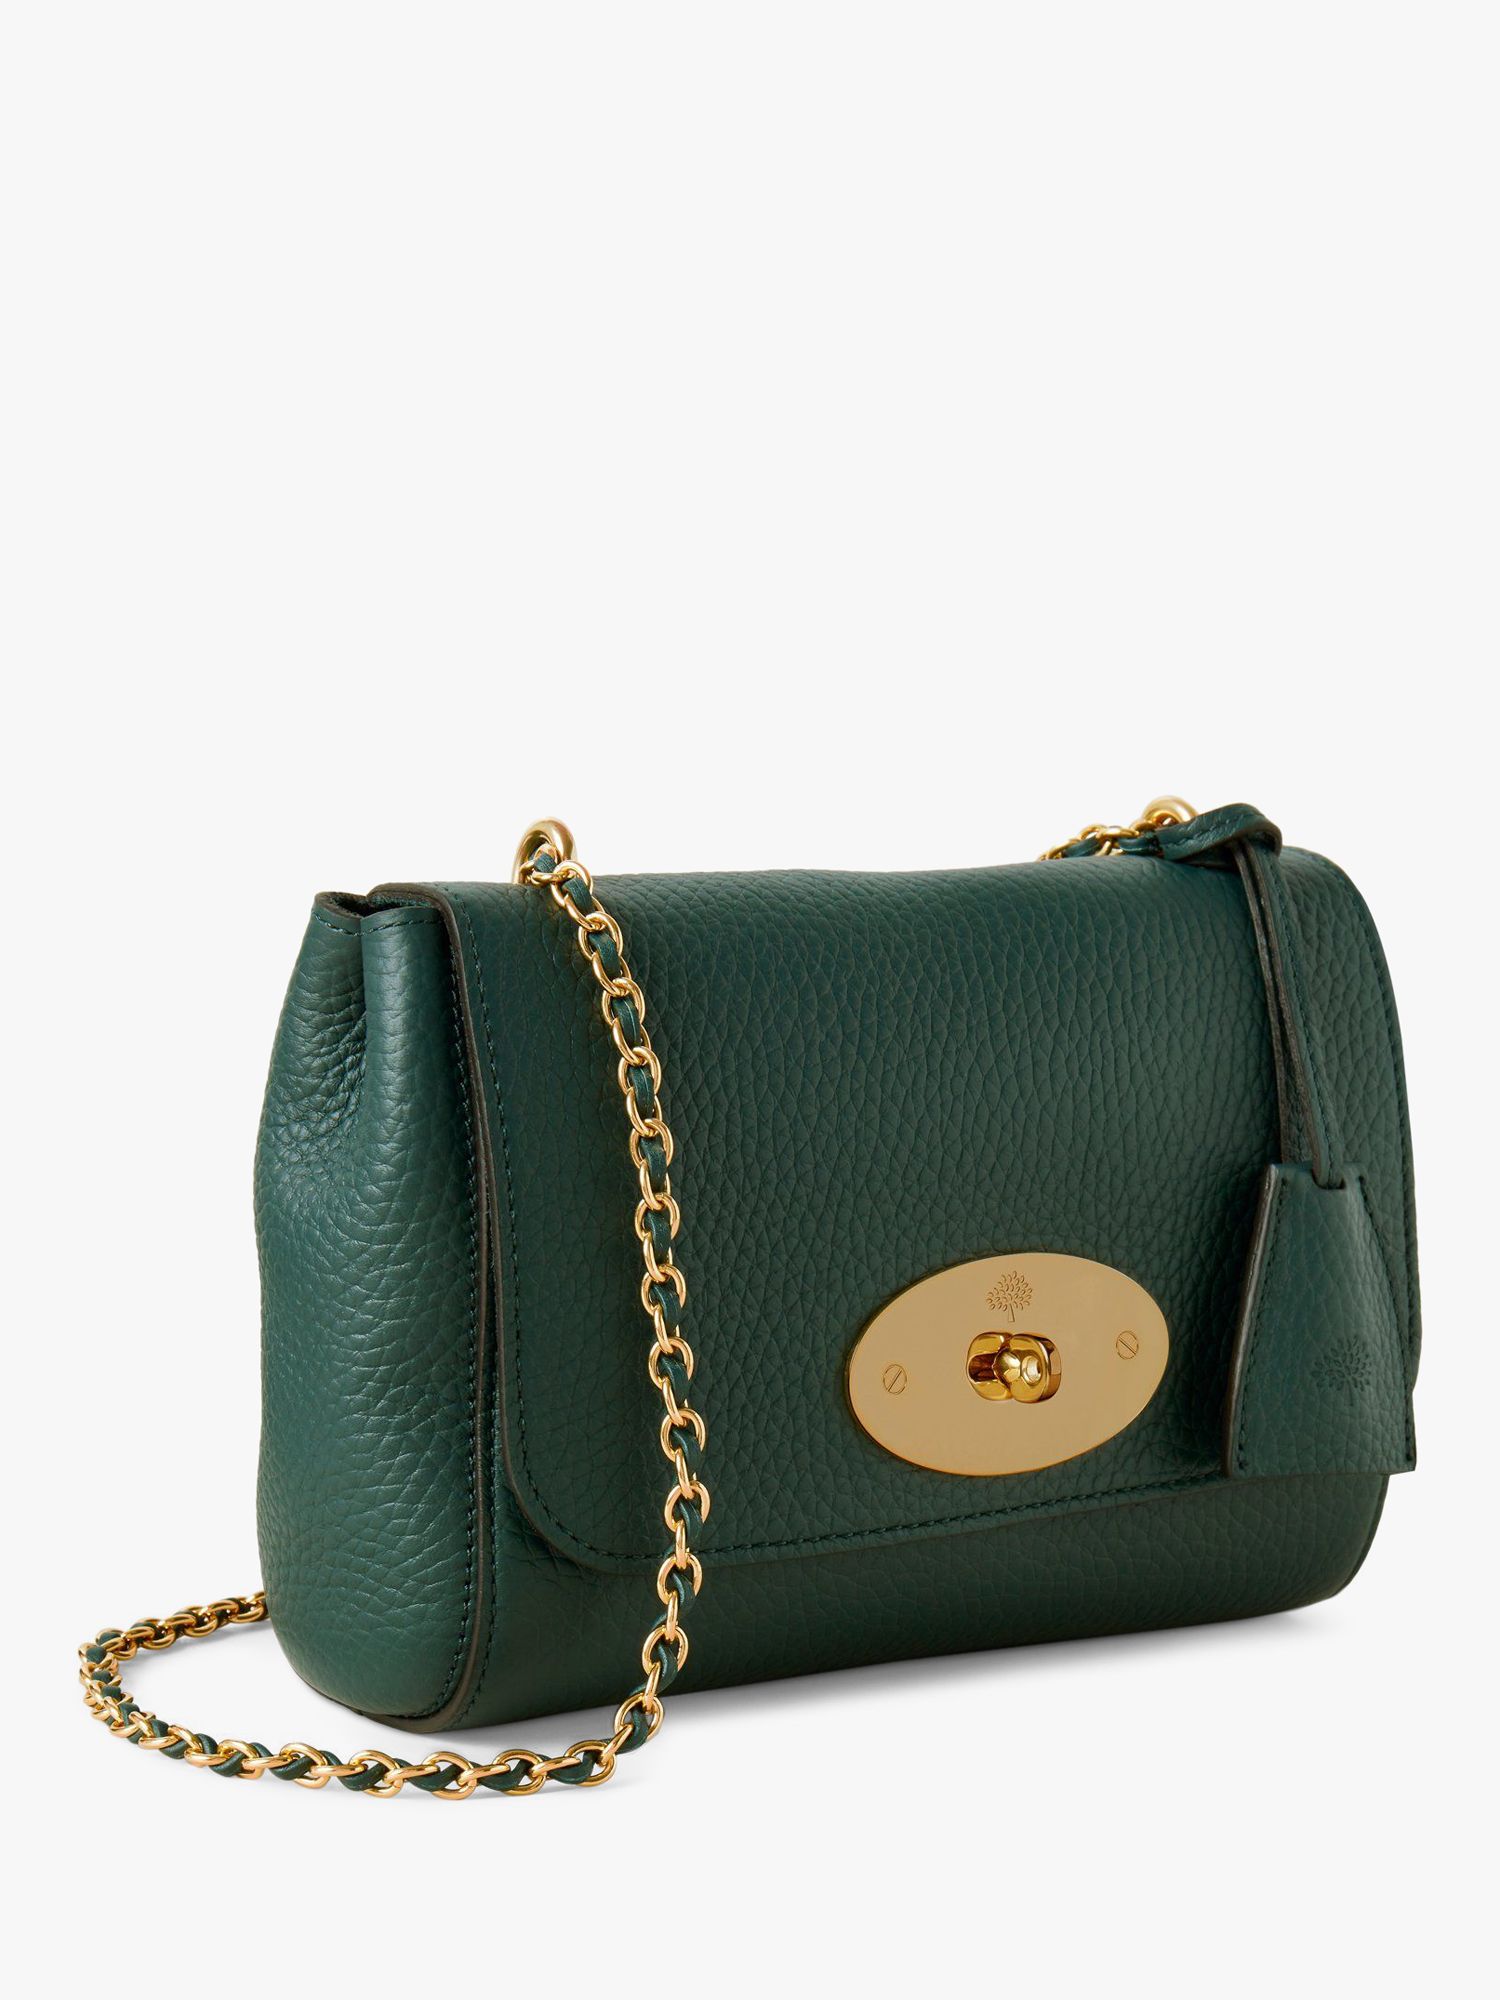 Mulberry Lily Heavy Grain Leather Shoulder Bag, Mulberry Green at John ...